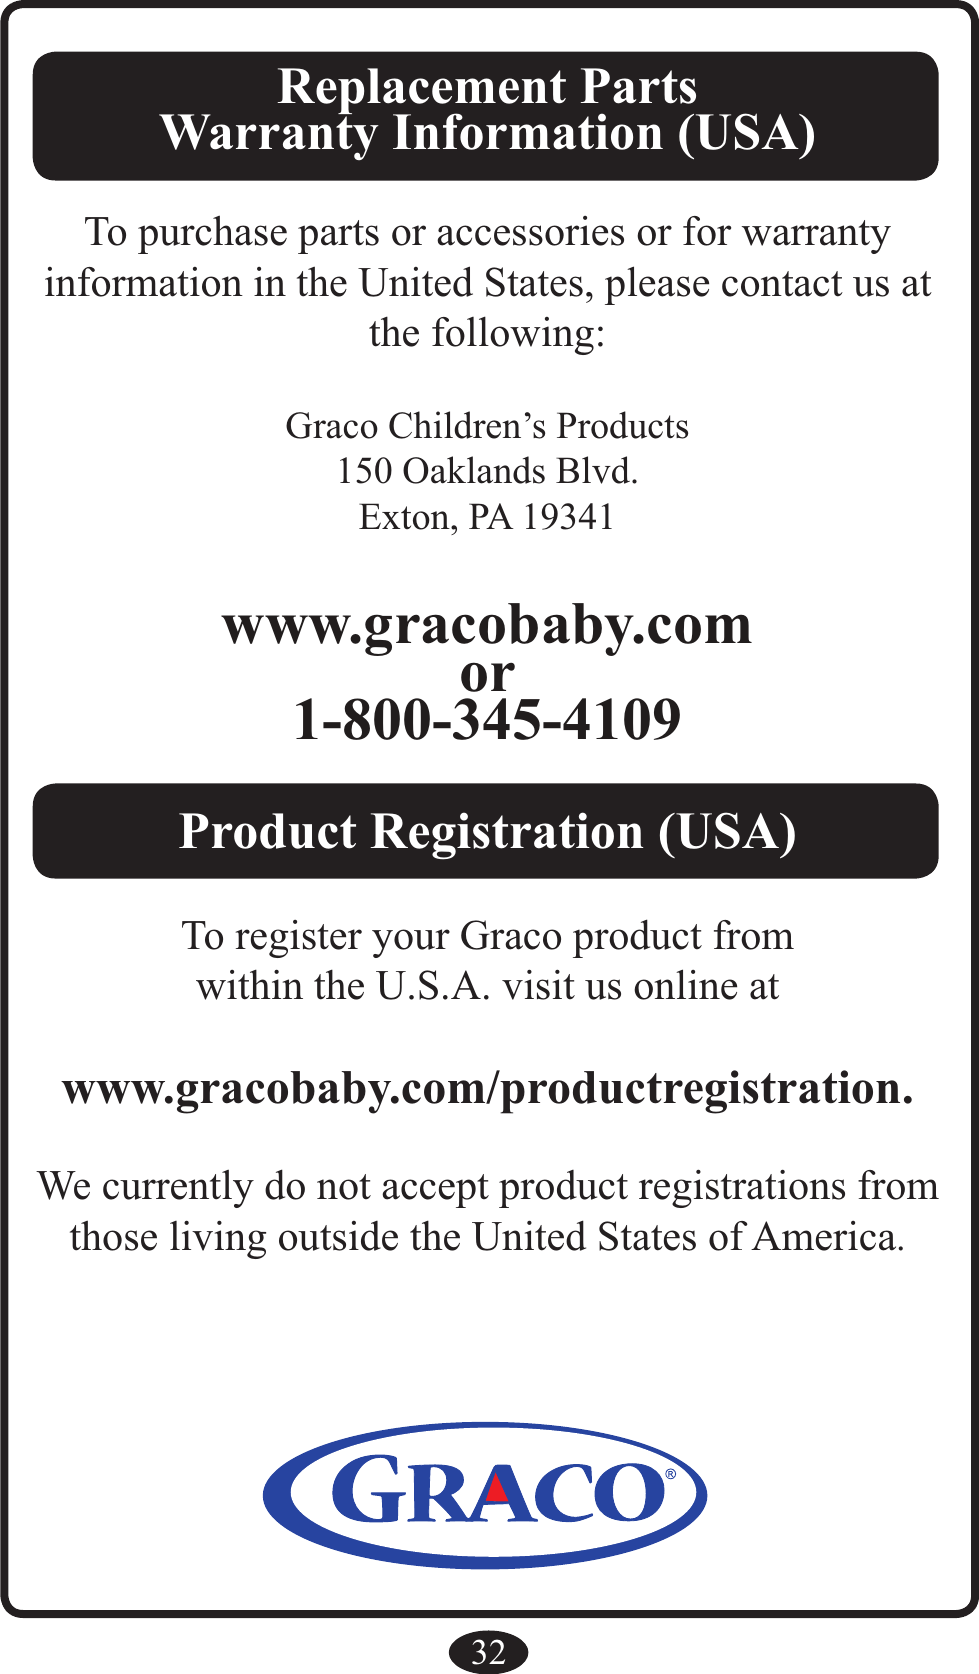 32Replacement PartsWarranty Information (USA) To purchase parts or accessories or for warranty information in the United States, please contact us at the following:Graco Children’s Products150 Oaklands Blvd.Exton, PA 19341www.gracobaby.comor1-800-345-4109Product Registration (USA)To register your Graco product fromwithin the U.S.A. visit us online atwww.gracobaby.com/productregistration.We currently do not accept product registrations fromthose living outside the United States of America.